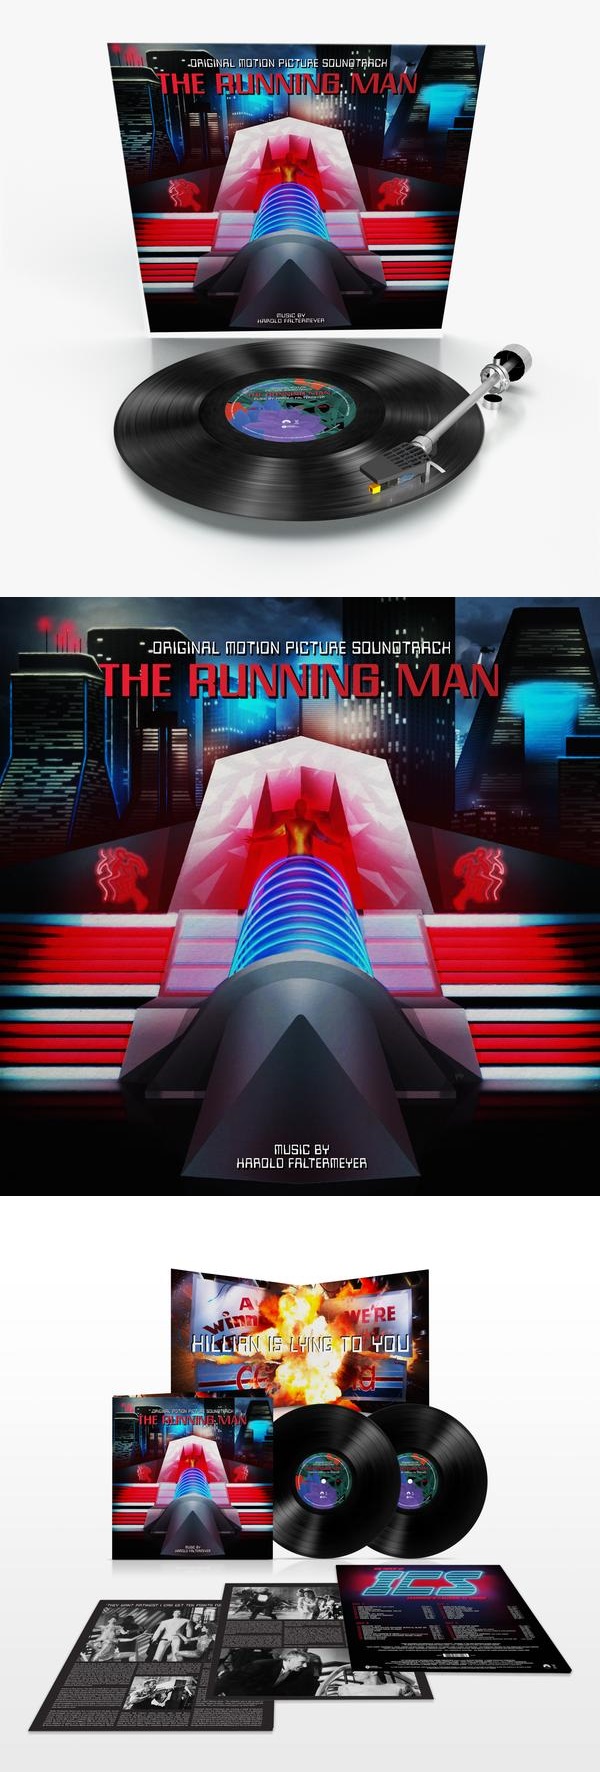 The Running Man: The Deluxe Edition (Vinyl)